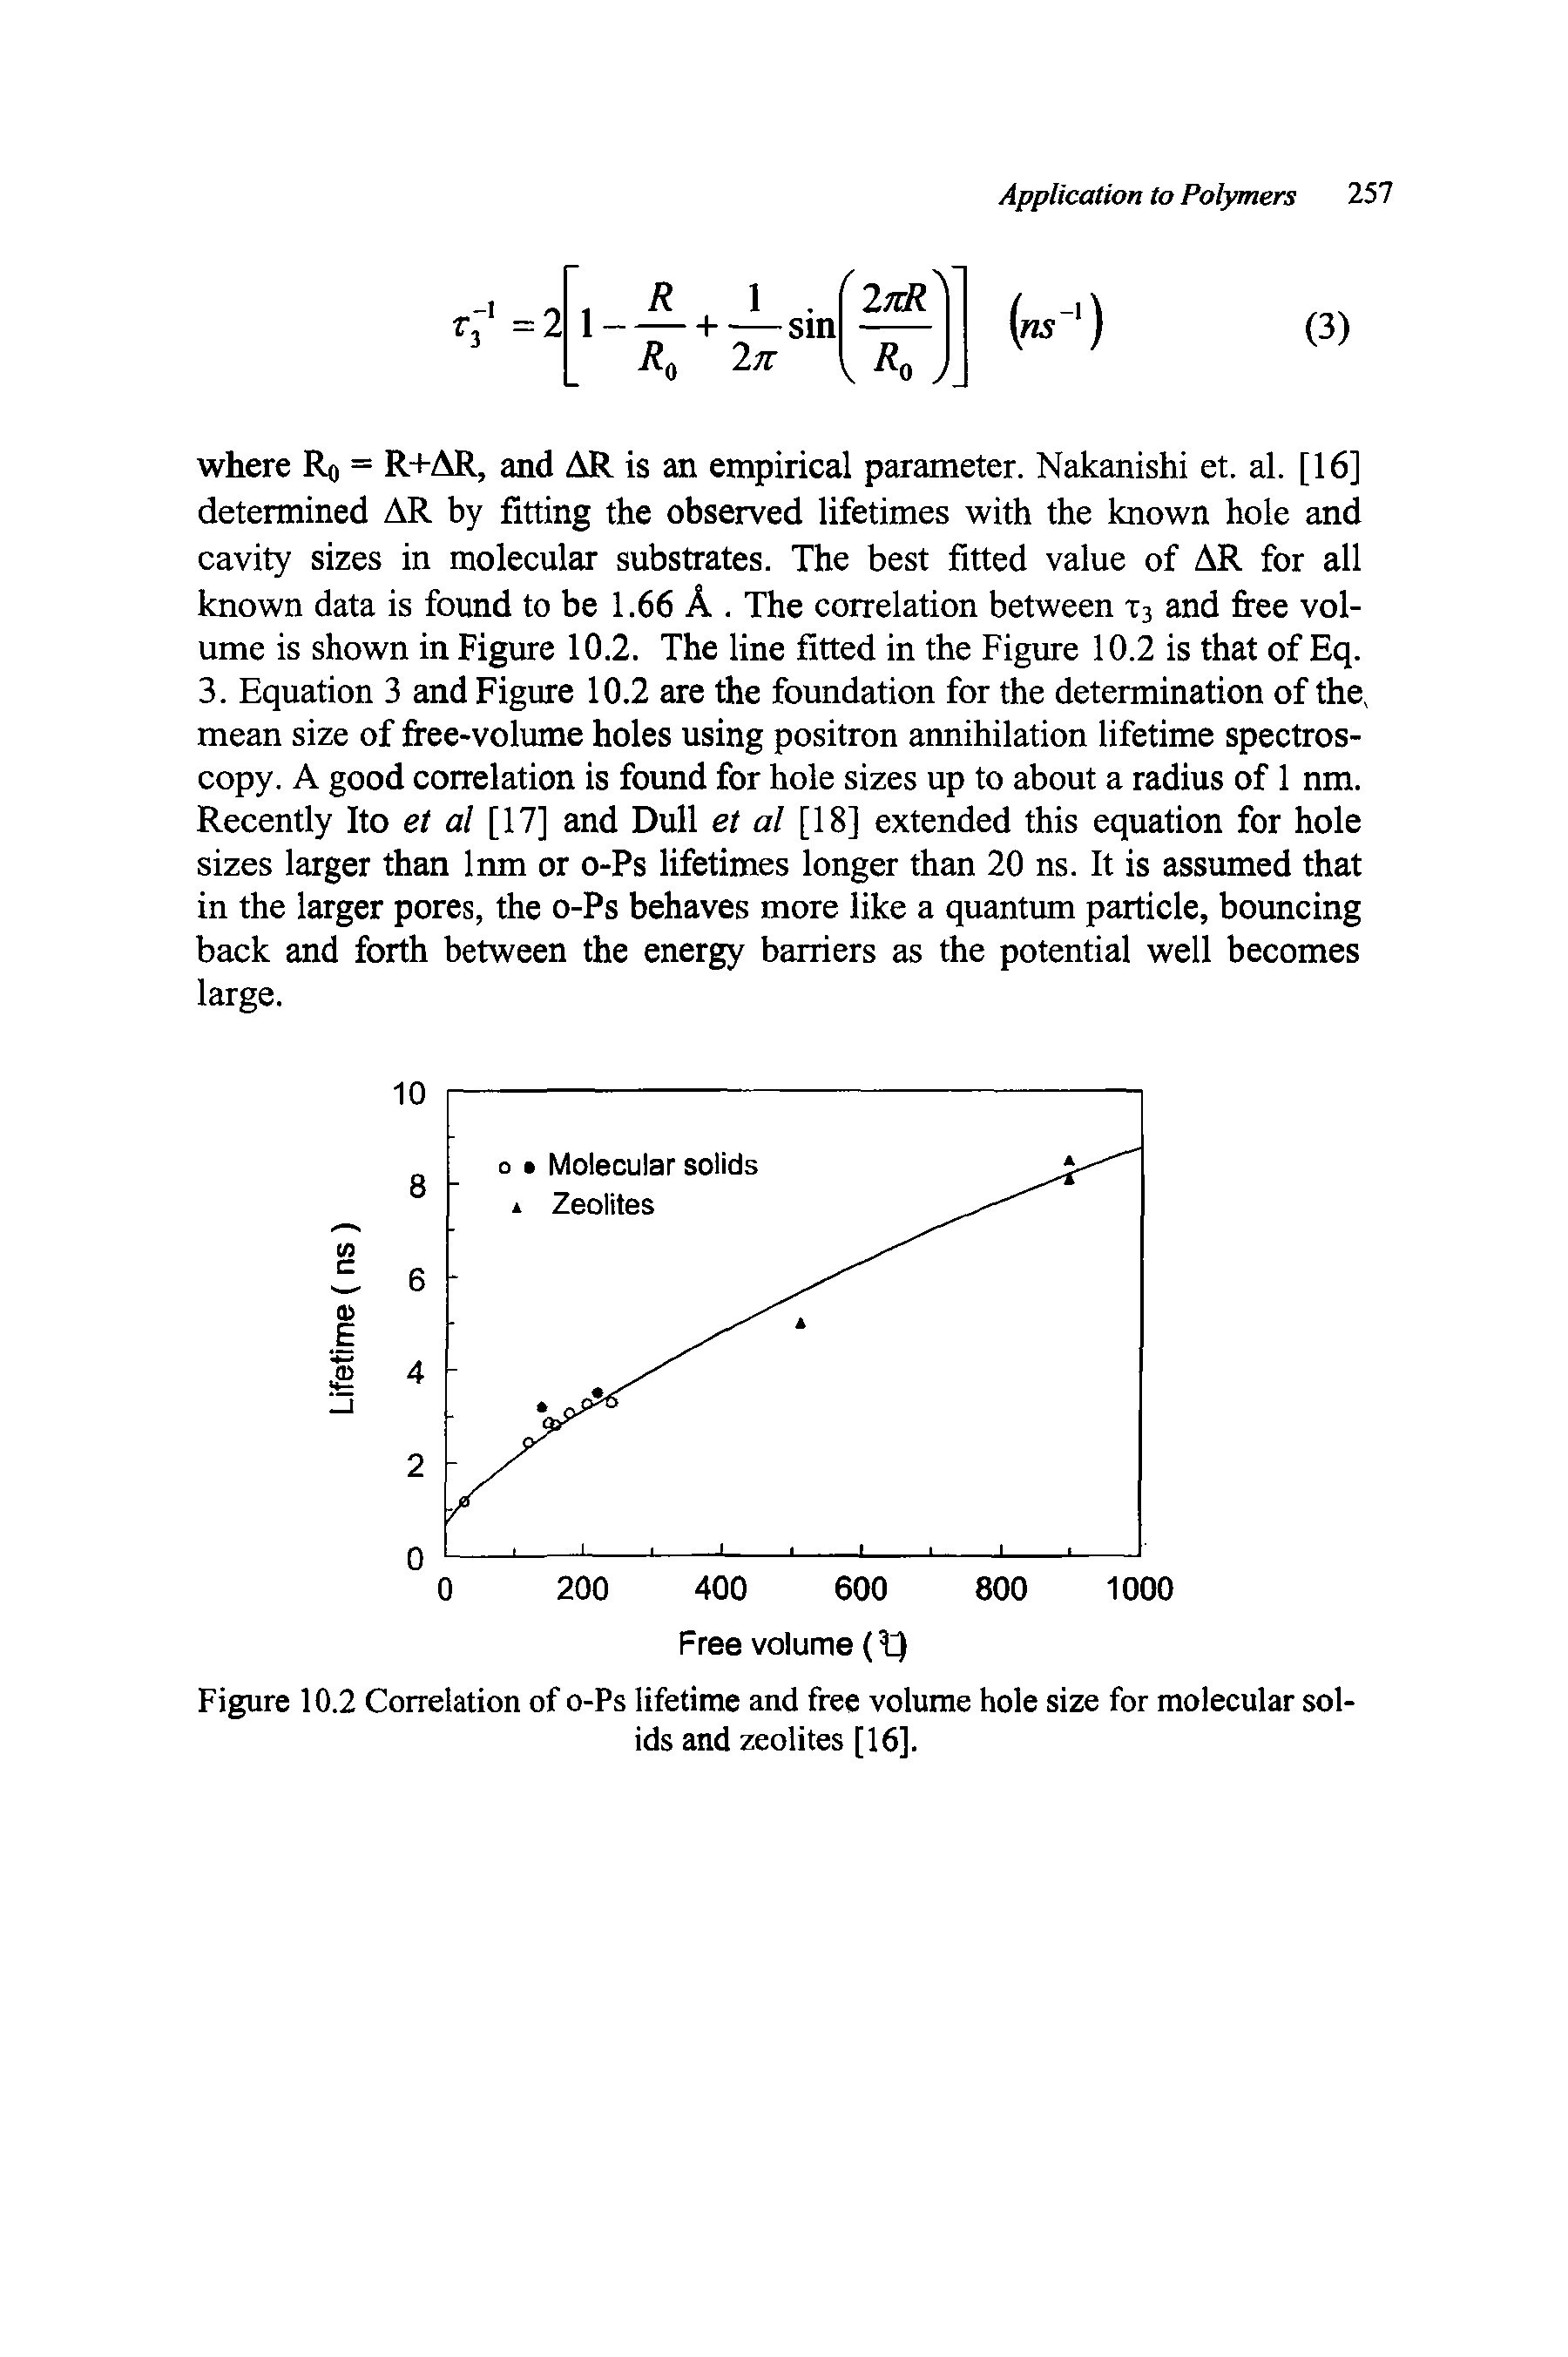 Figure 10.2 Correlation of o-Ps lifetime and free volume hole size for molecular solids and zeolites [16].